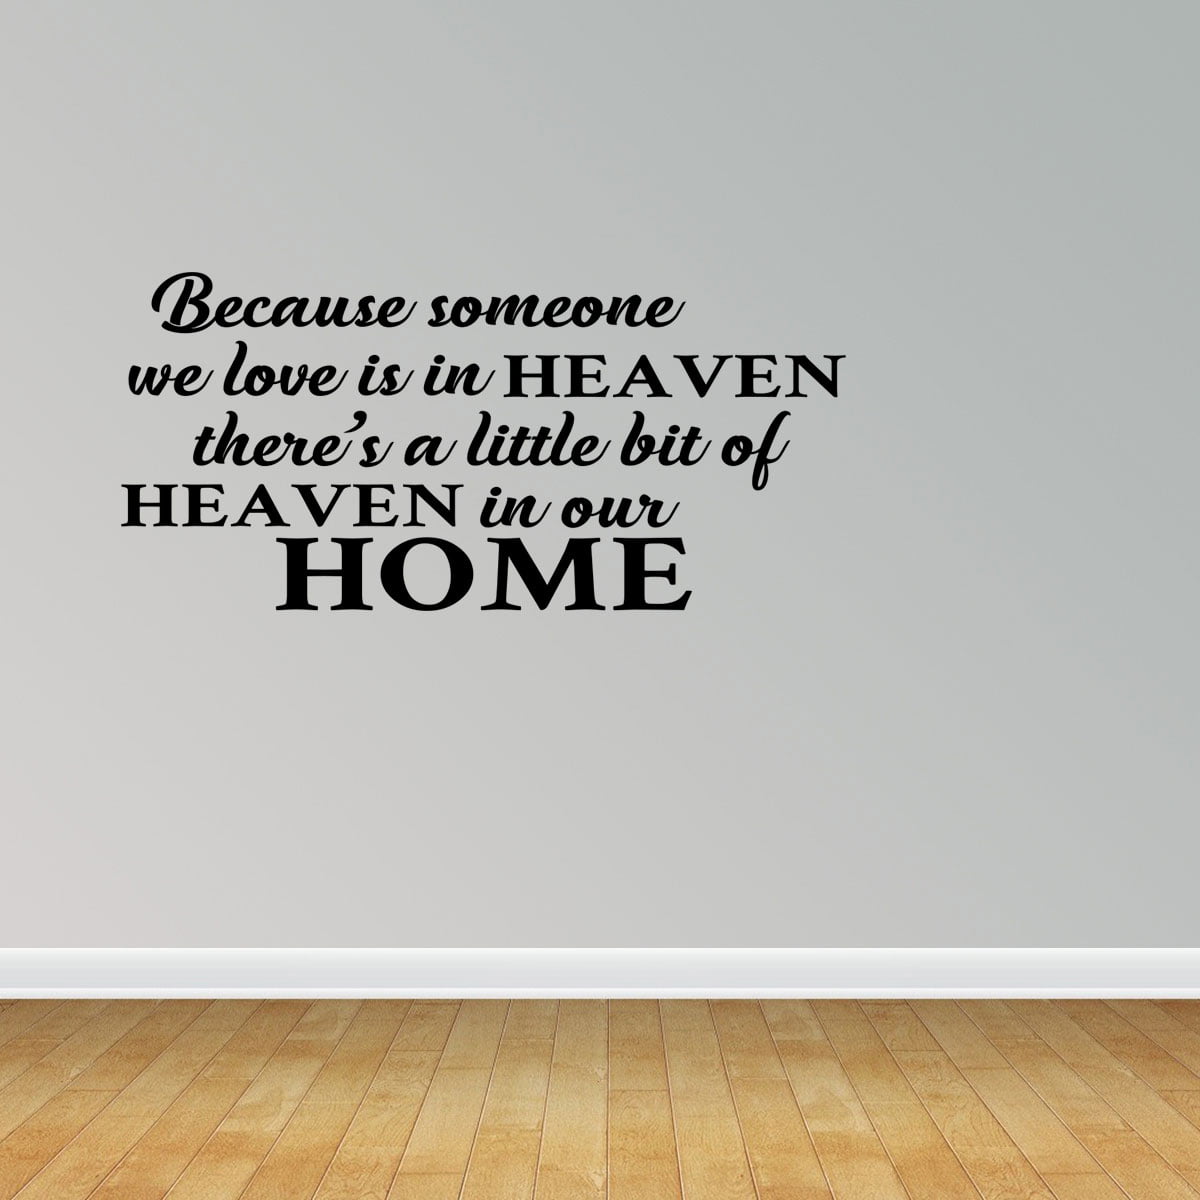 Vinyl Sticker Fits 10" x 8" Frame Because Someone We Love is in Heaven QUOTE 